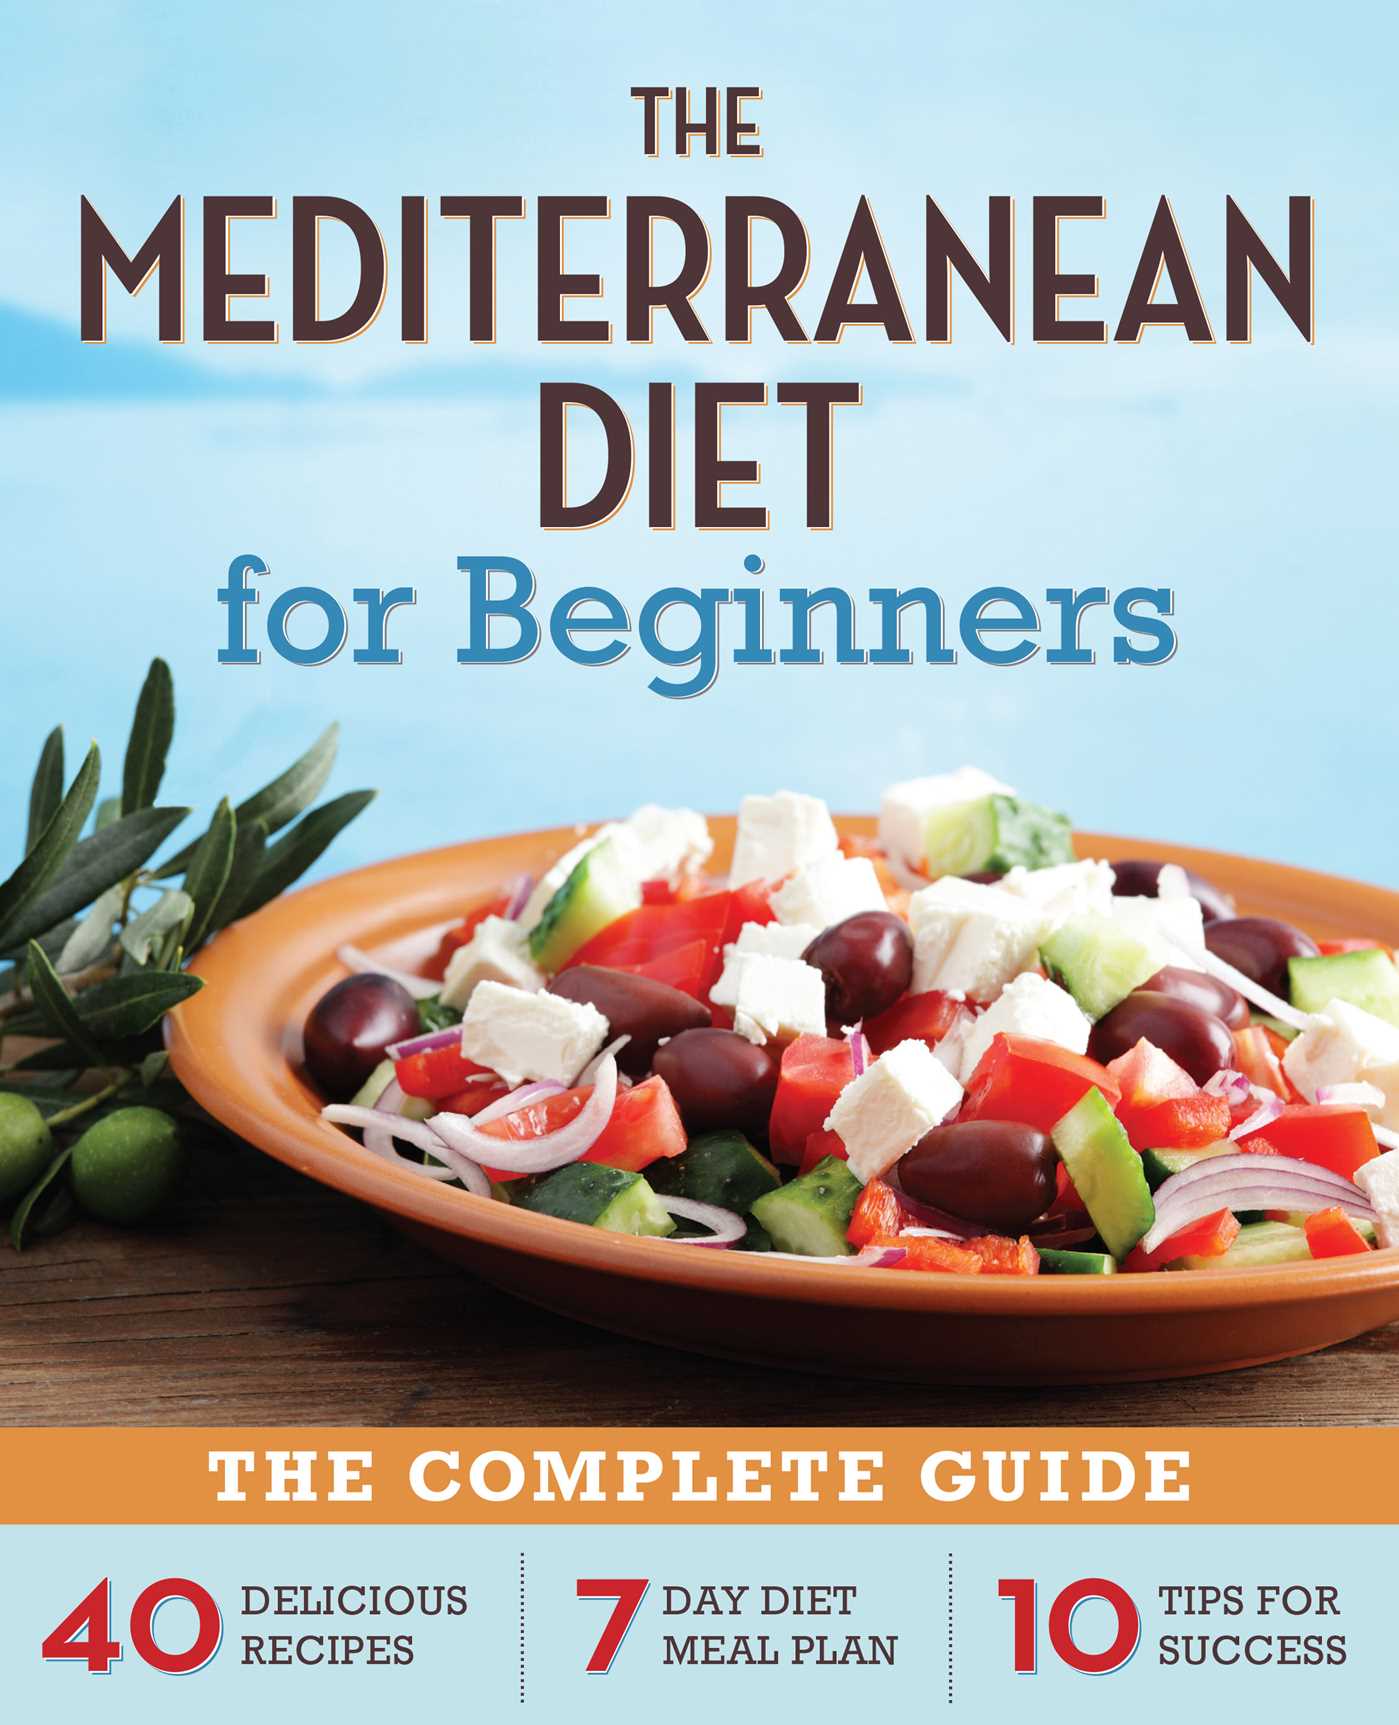 The Mediterranean Diet for Beginners : The Complete Guide - 40 Delicious Recipes, 7-Day Diet Meal Plan, and 10 Tips for Success (Paperback) - image 1 of 1